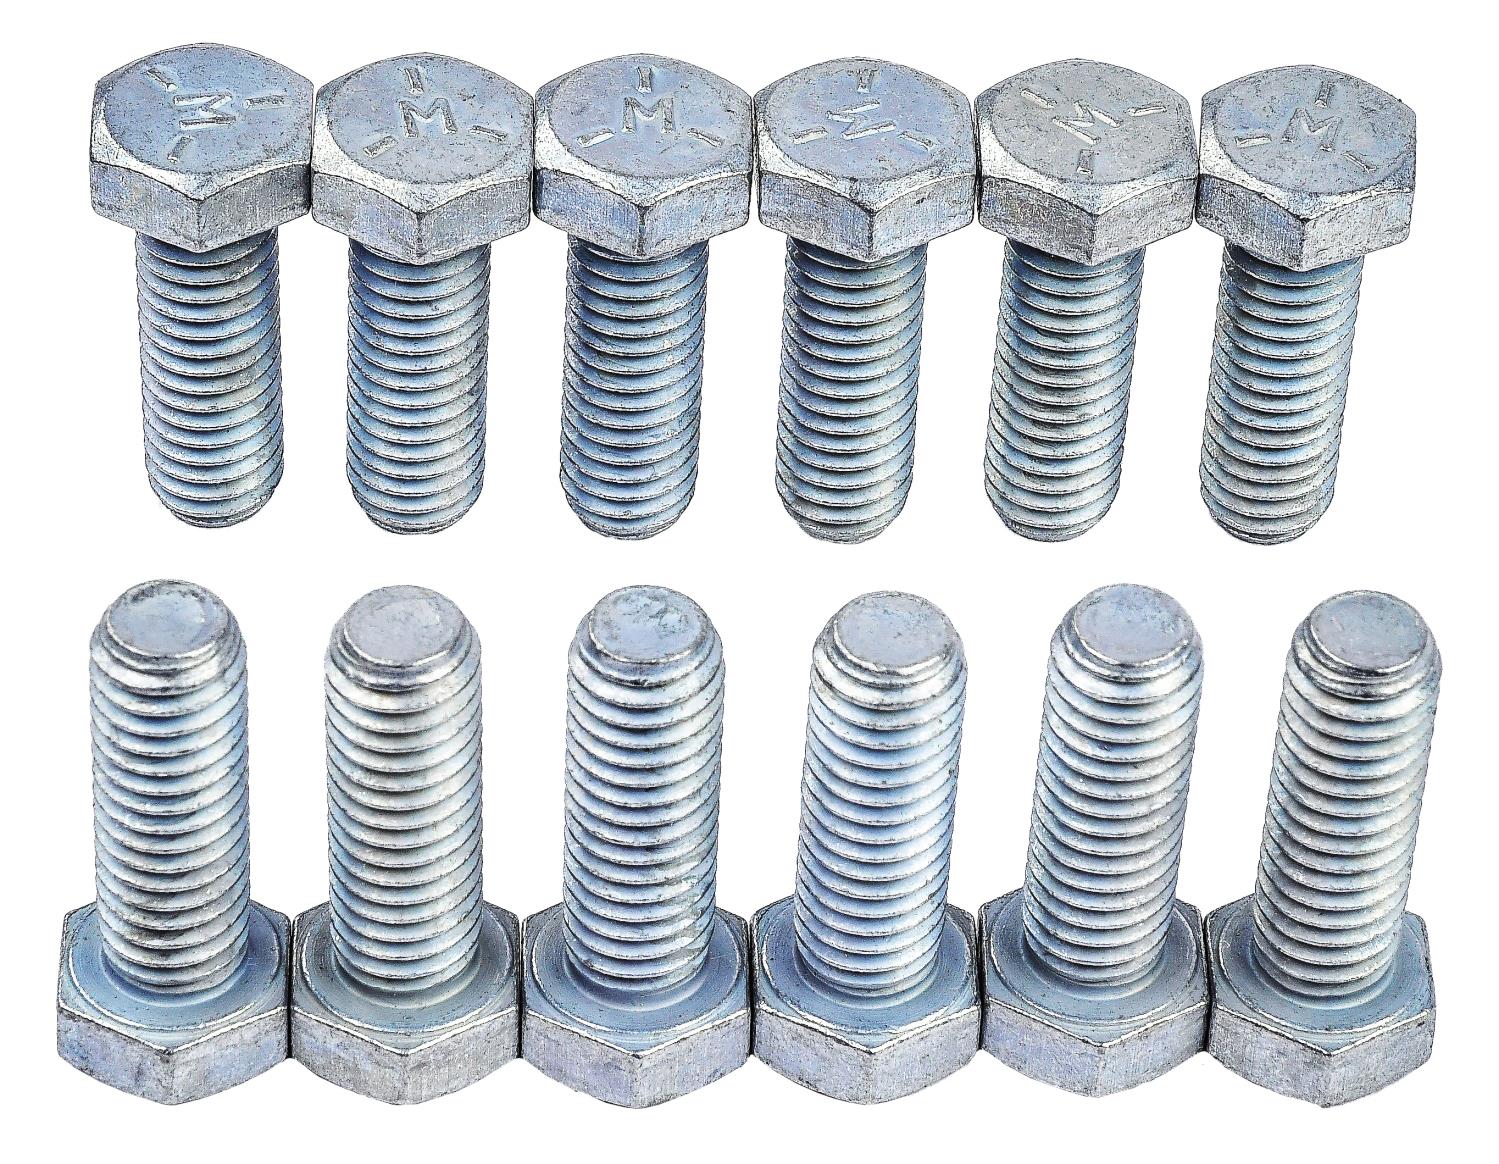 Intake Manifold Bolt Kit for 1965-1972 Small Block Chevrolet Engines